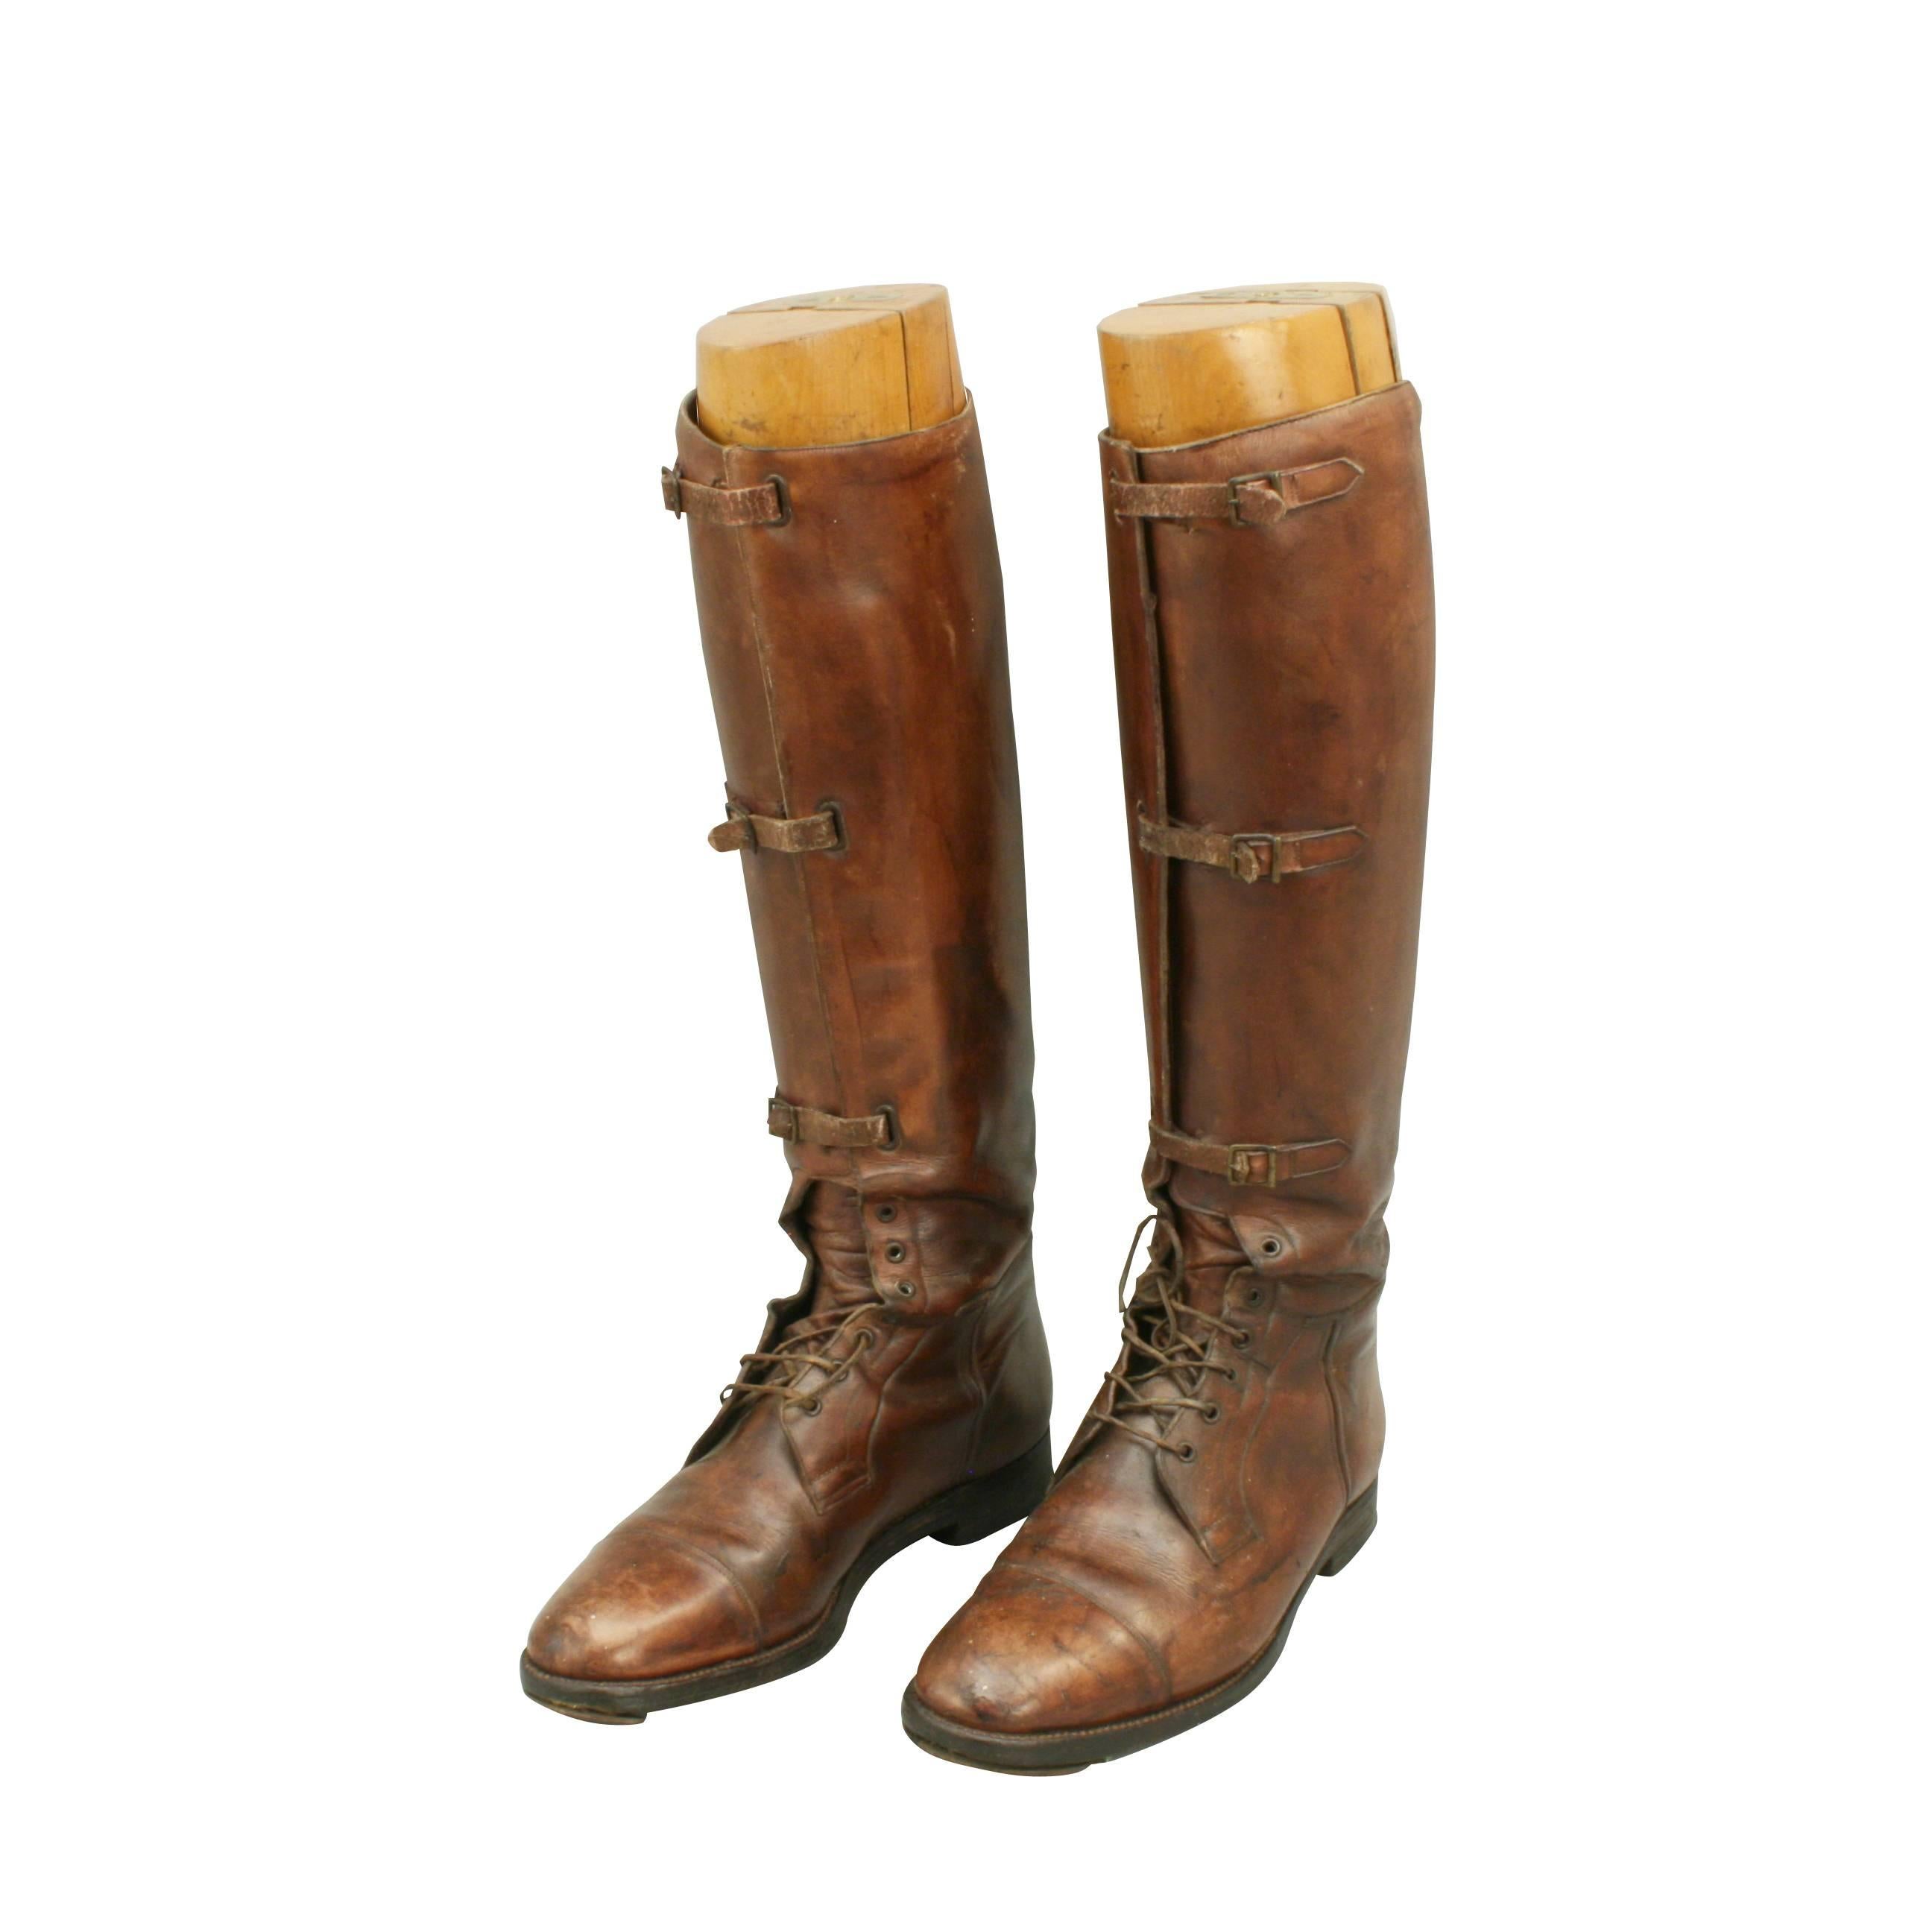 Vintage pair of brown leather field / riding boots.
A pair of tan leather field boots with beech wood trees. Probably size 8. The beechwood trees are not original to these boots and there are no screw handles.
Field boots are the boot of choice by